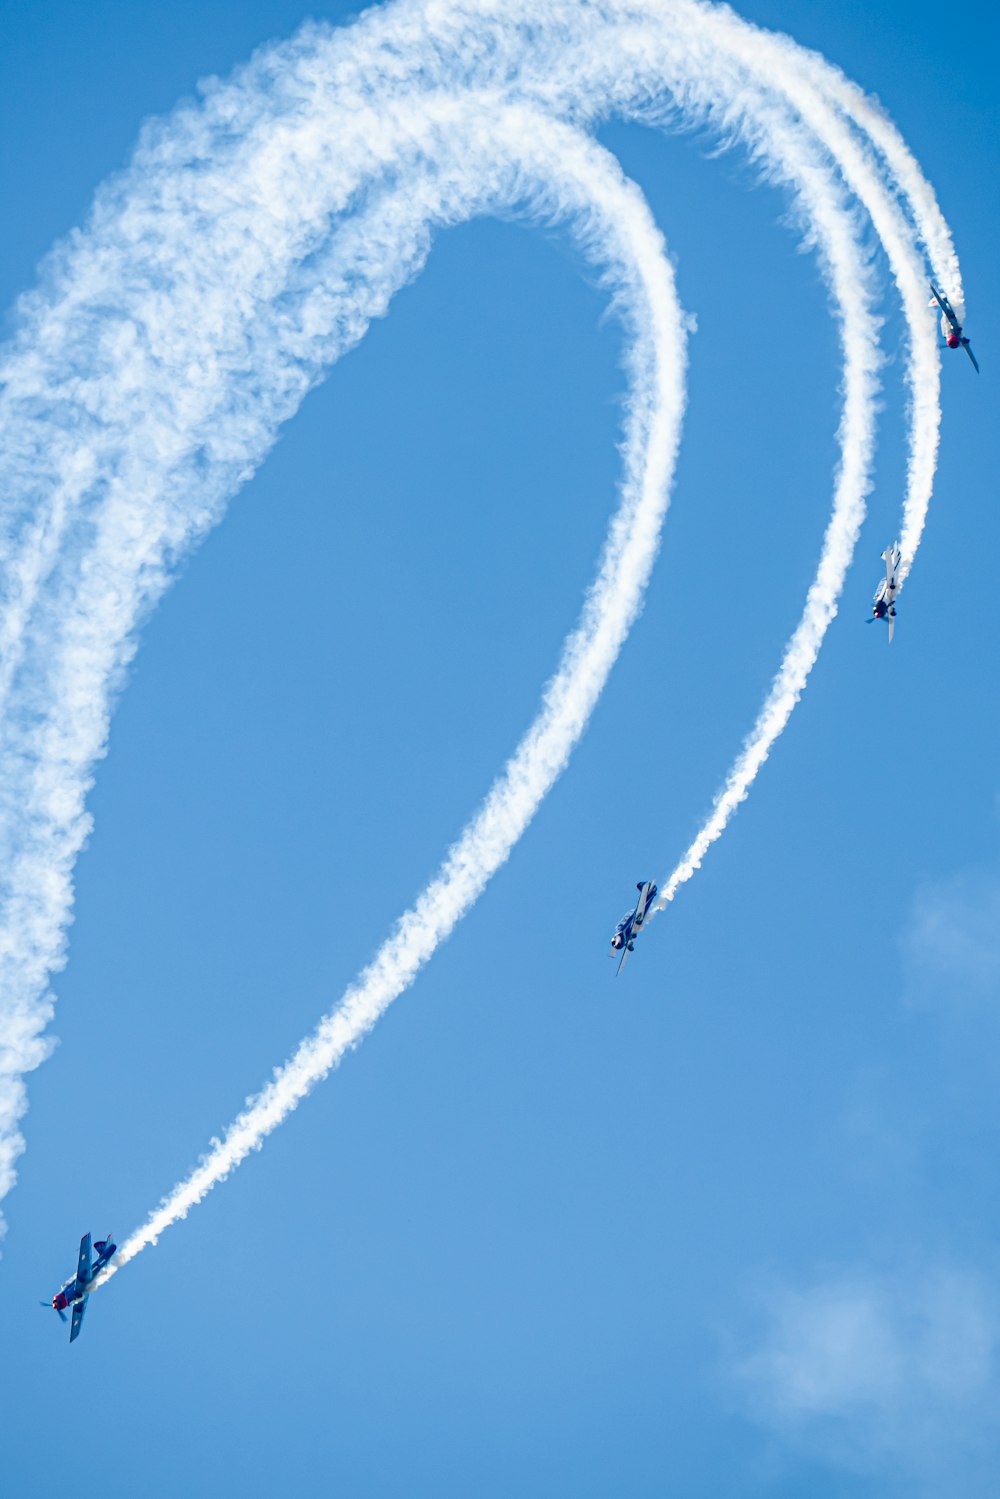 a group of airplanes flying in formation in the sky